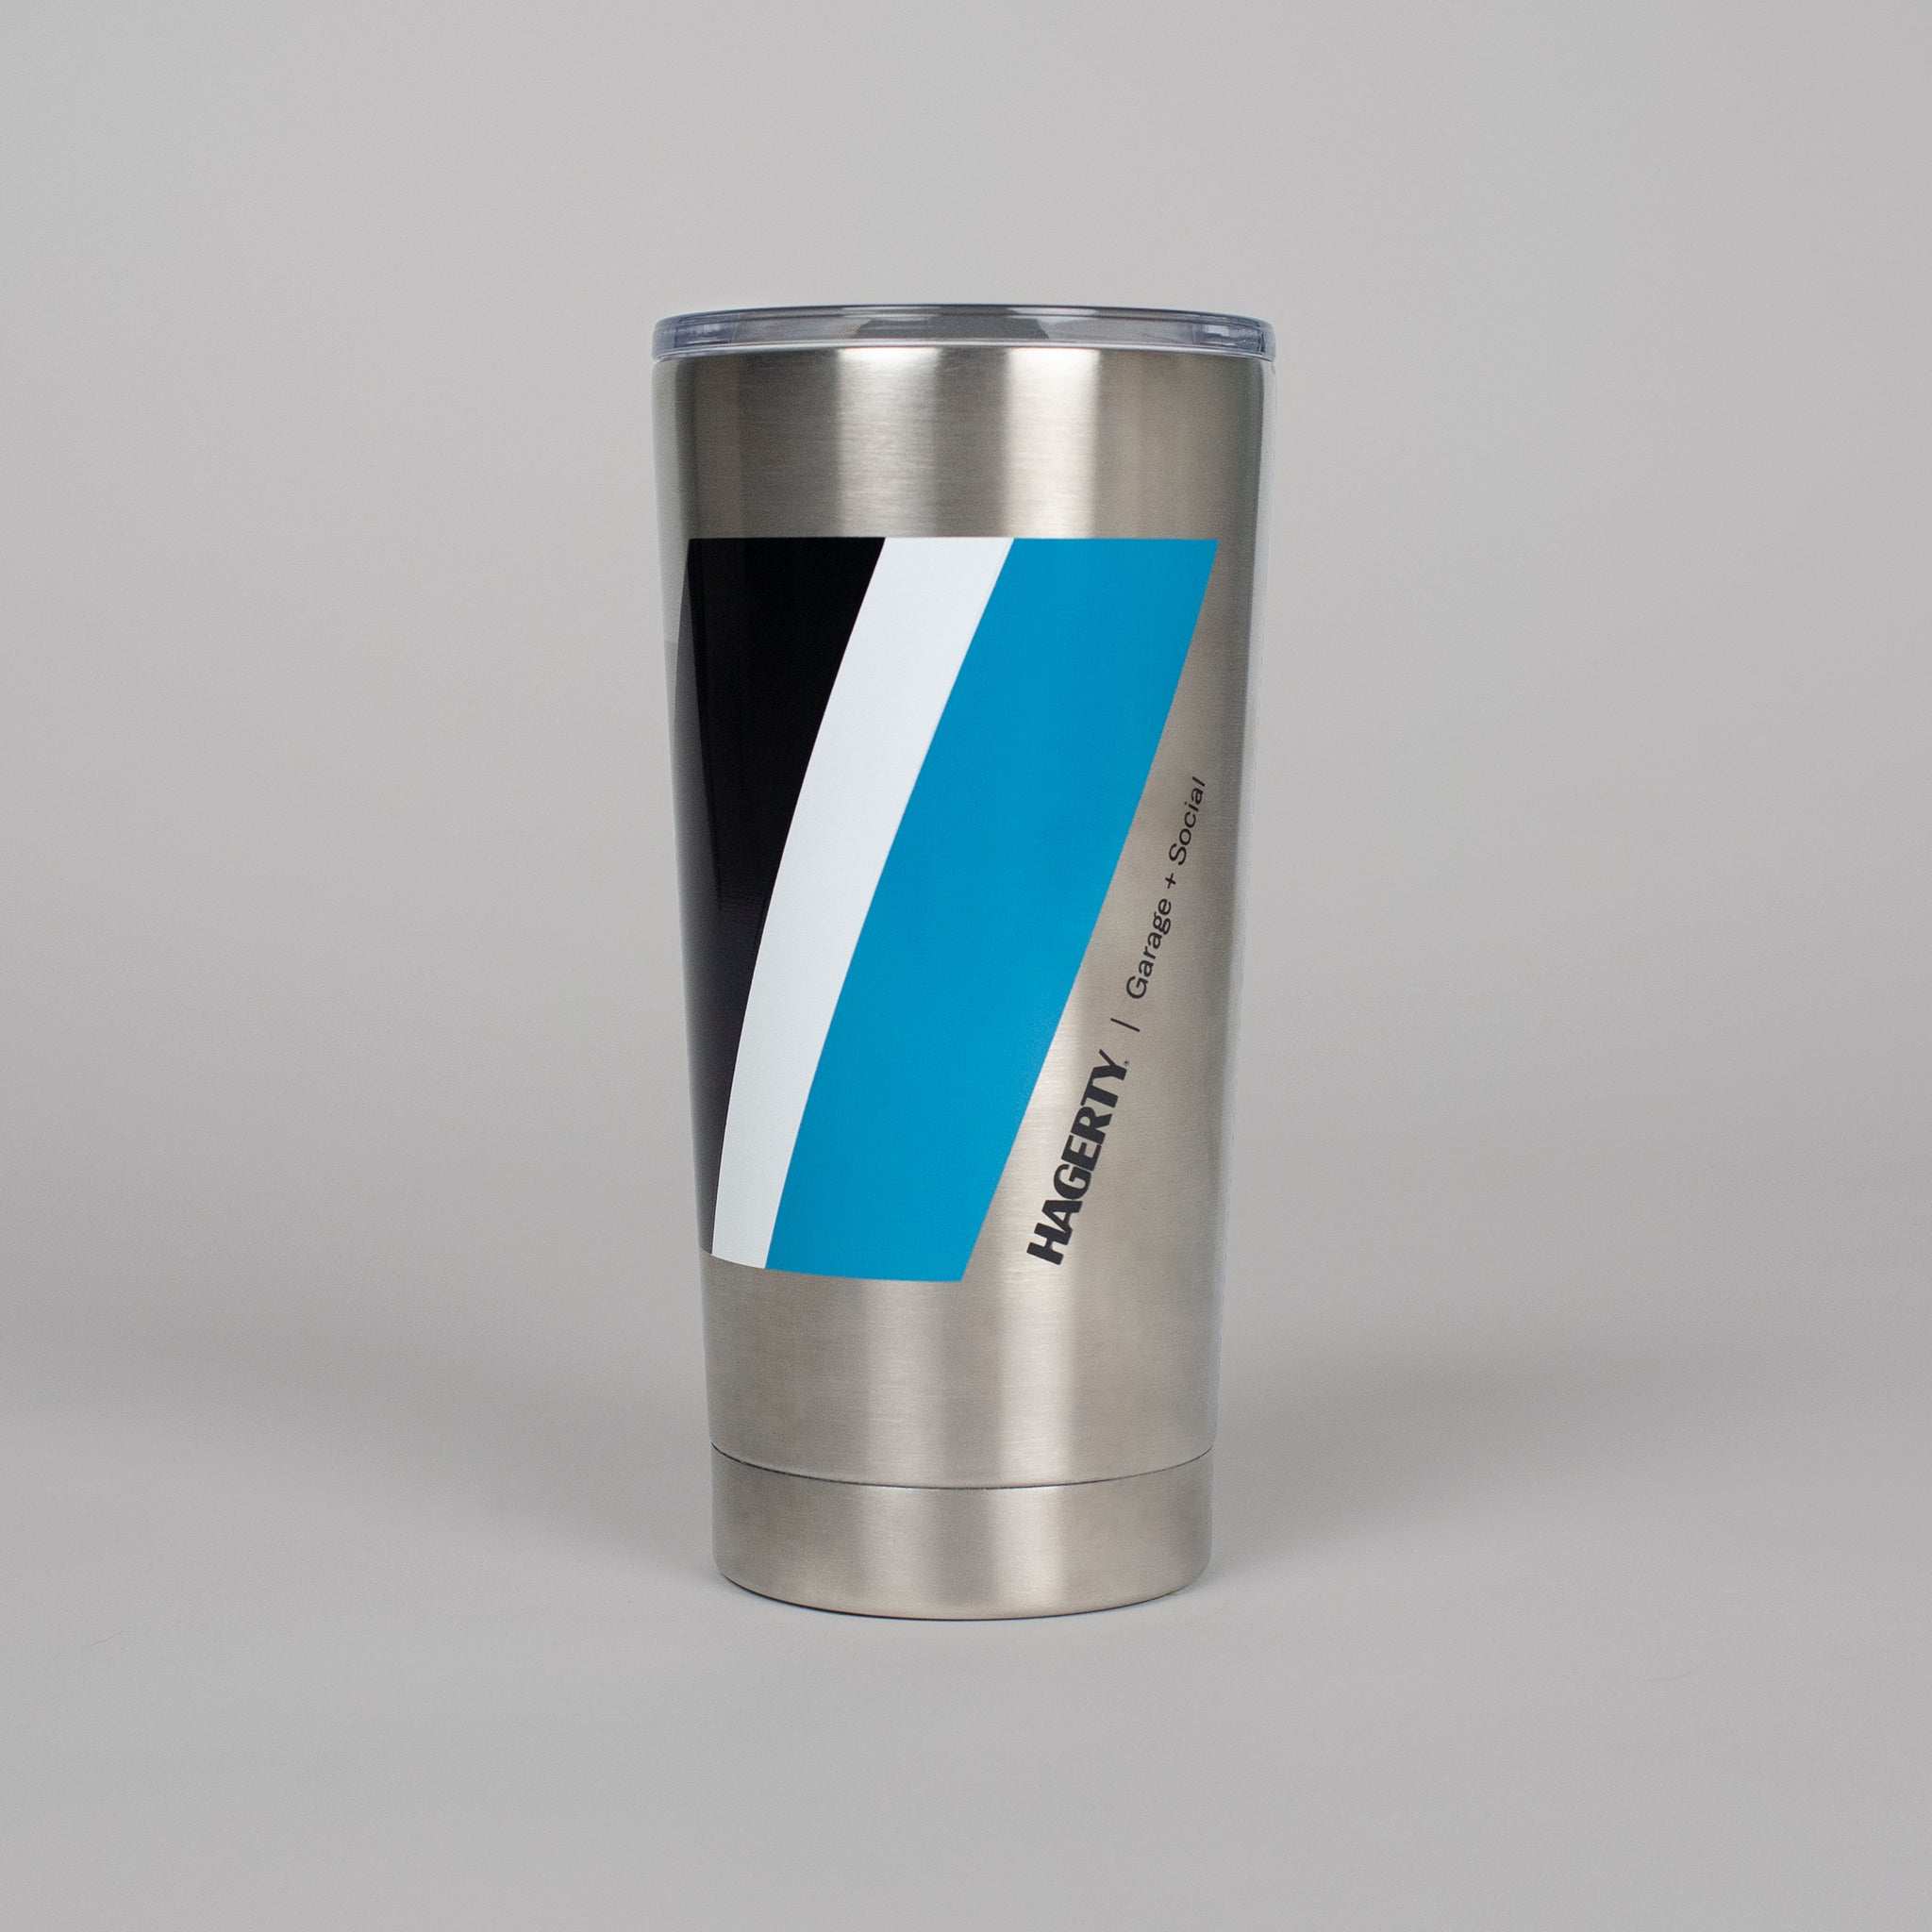 Stainless steel tumbler with the Hagerty and Garage and Social logo alongside the brand's black, white, and blue racing stripe design against an all white background.. Made exclusively for The Shop by Hagerty.